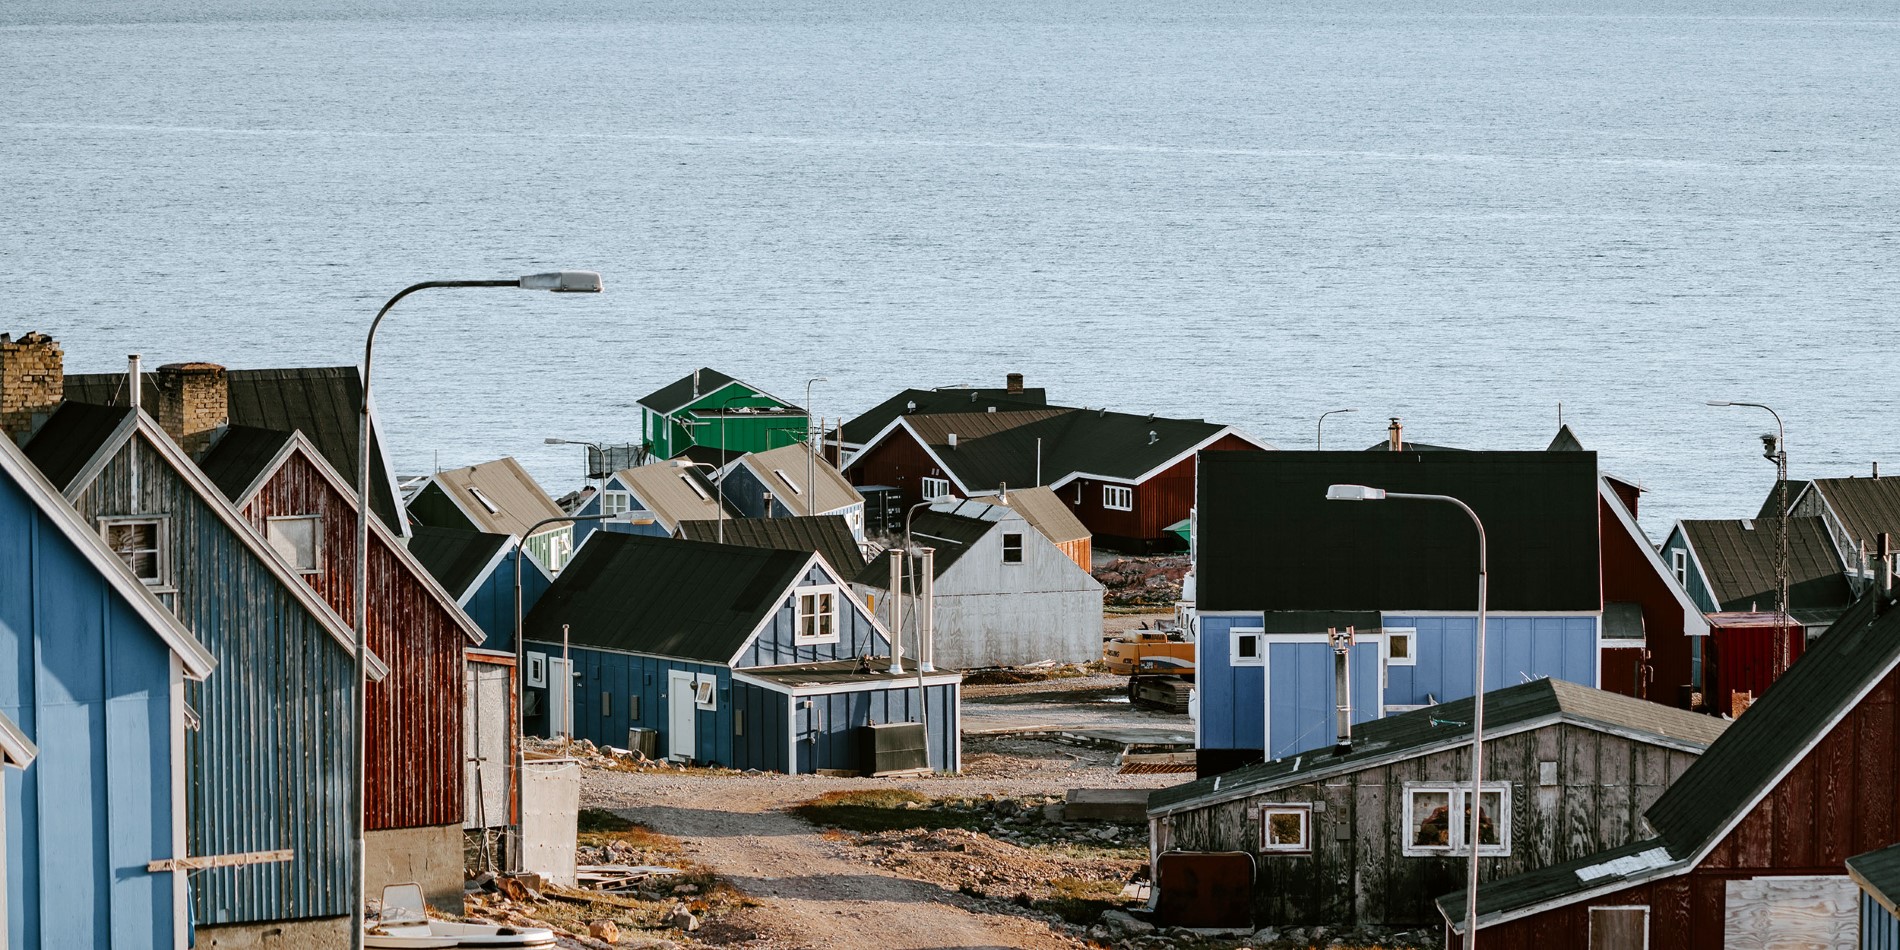 Get a taste of traditional Greenlandic life.